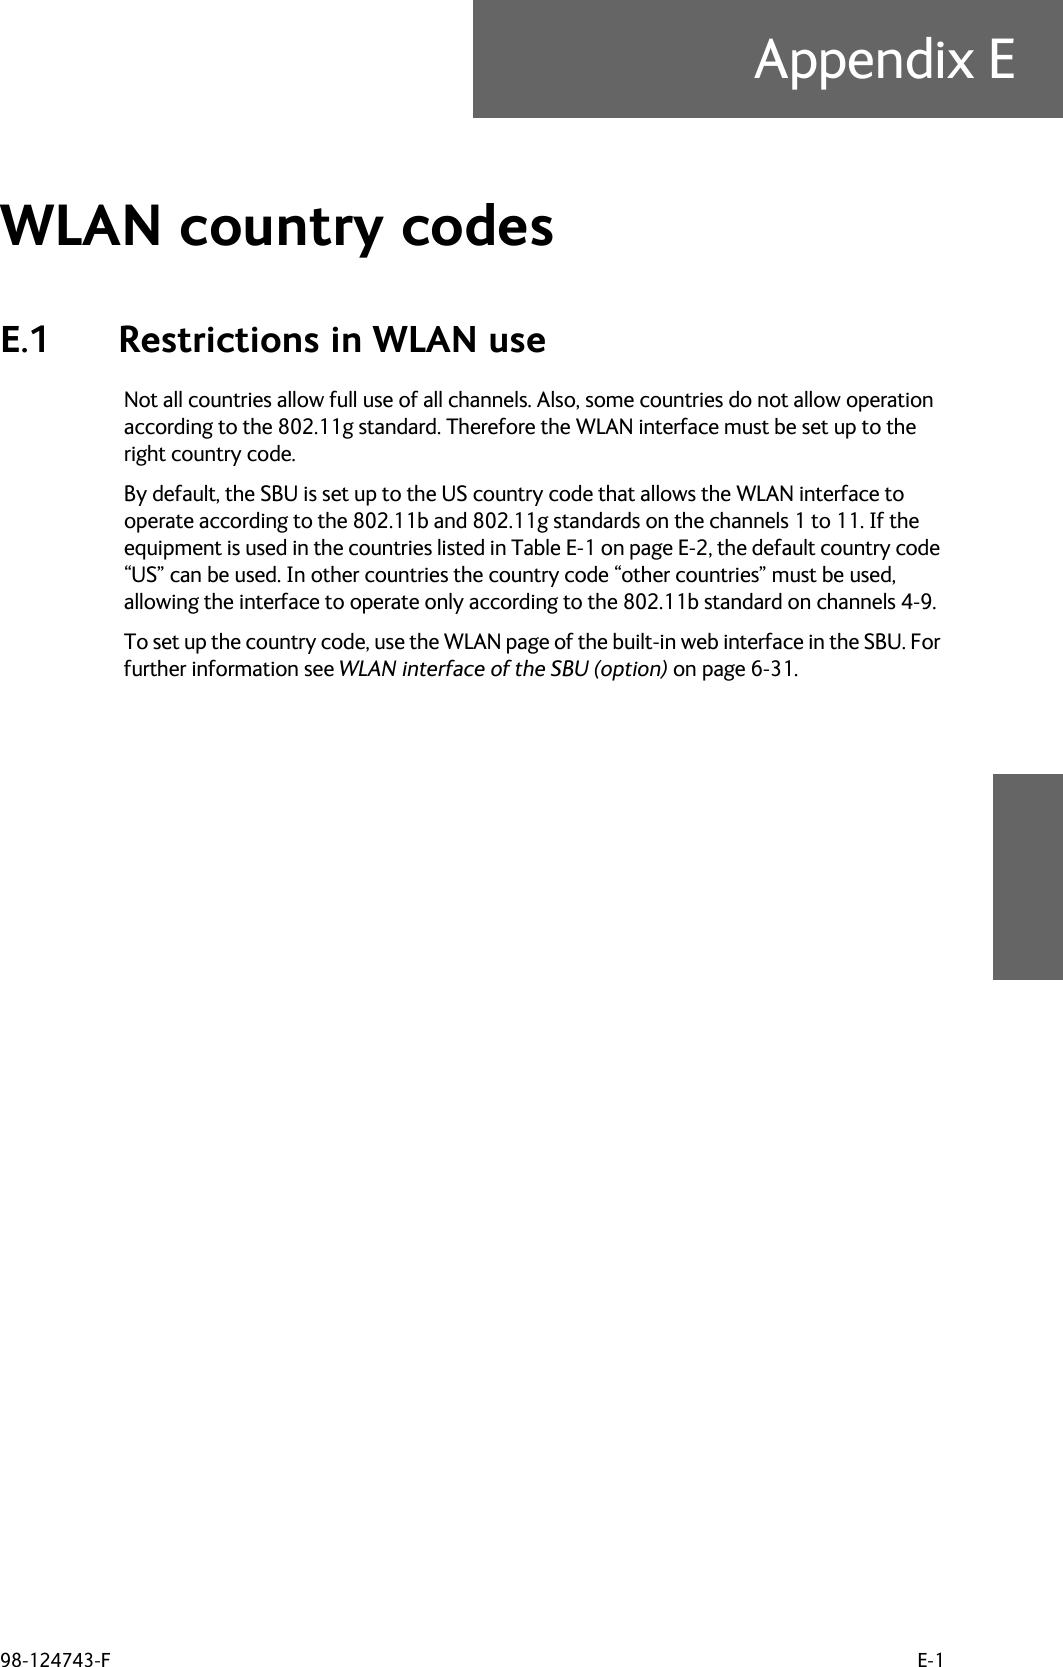 98-124743-F E-1Appendix EWLAN country codes EE.1 Restrictions in WLAN useNot all countries allow full use of all channels. Also, some countries do not allow operation according to the 802.11g standard. Therefore the WLAN interface must be set up to the right country code.By default, the SBU is set up to the US country code that allows the WLAN interface to operate according to the 802.11b and 802.11g standards on the channels 1 to 11. If the equipment is used in the countries listed in Table E-1 on page E-2, the default country code “US” can be used. In other countries the country code “other countries” must be used, allowing the interface to operate only according to the 802.11b standard on channels 4-9.To set up the country code, use the WLAN page of the built-in web interface in the SBU. For further information see WLAN interface of the SBU (option) on page 6-31.